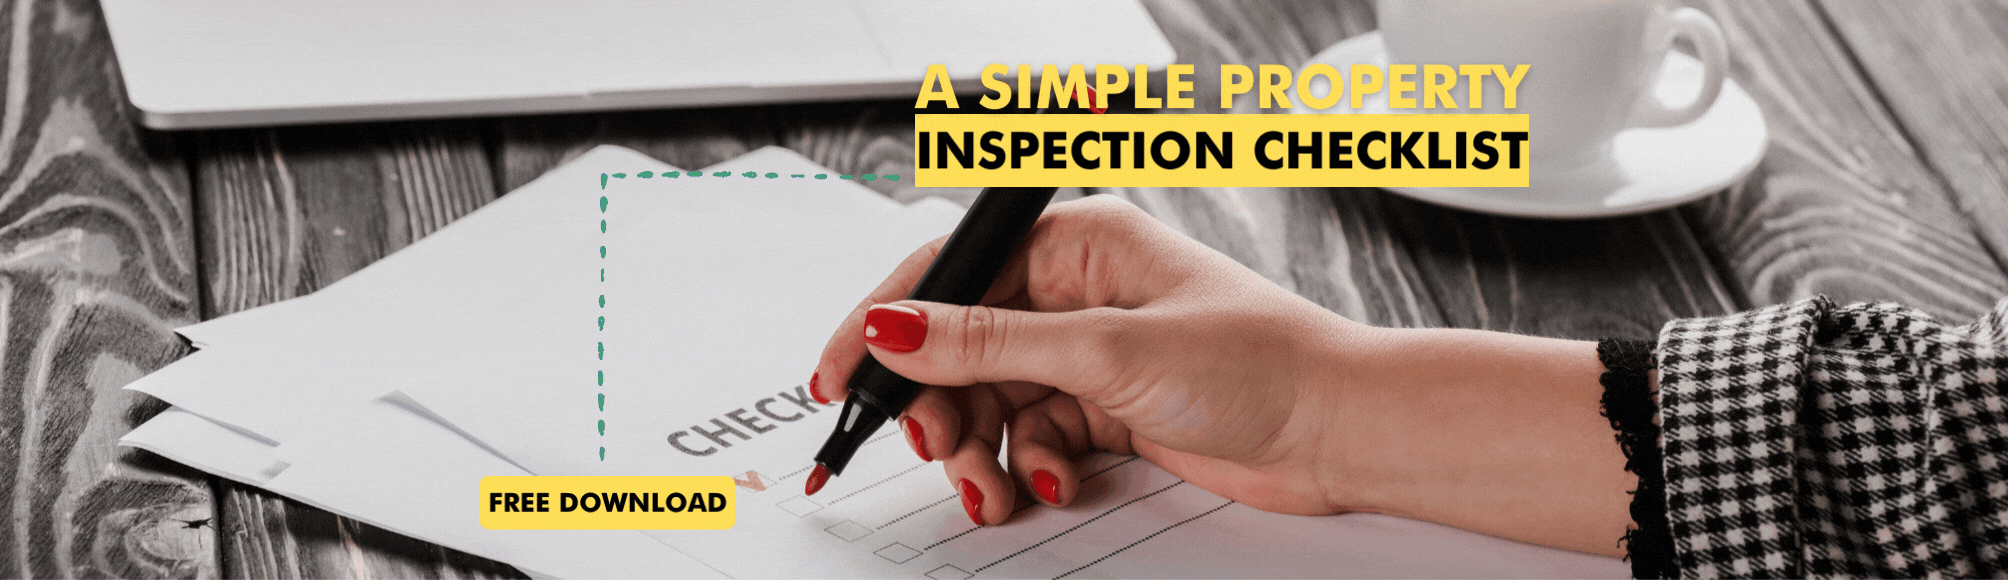 Simple Property Inspection Checklist